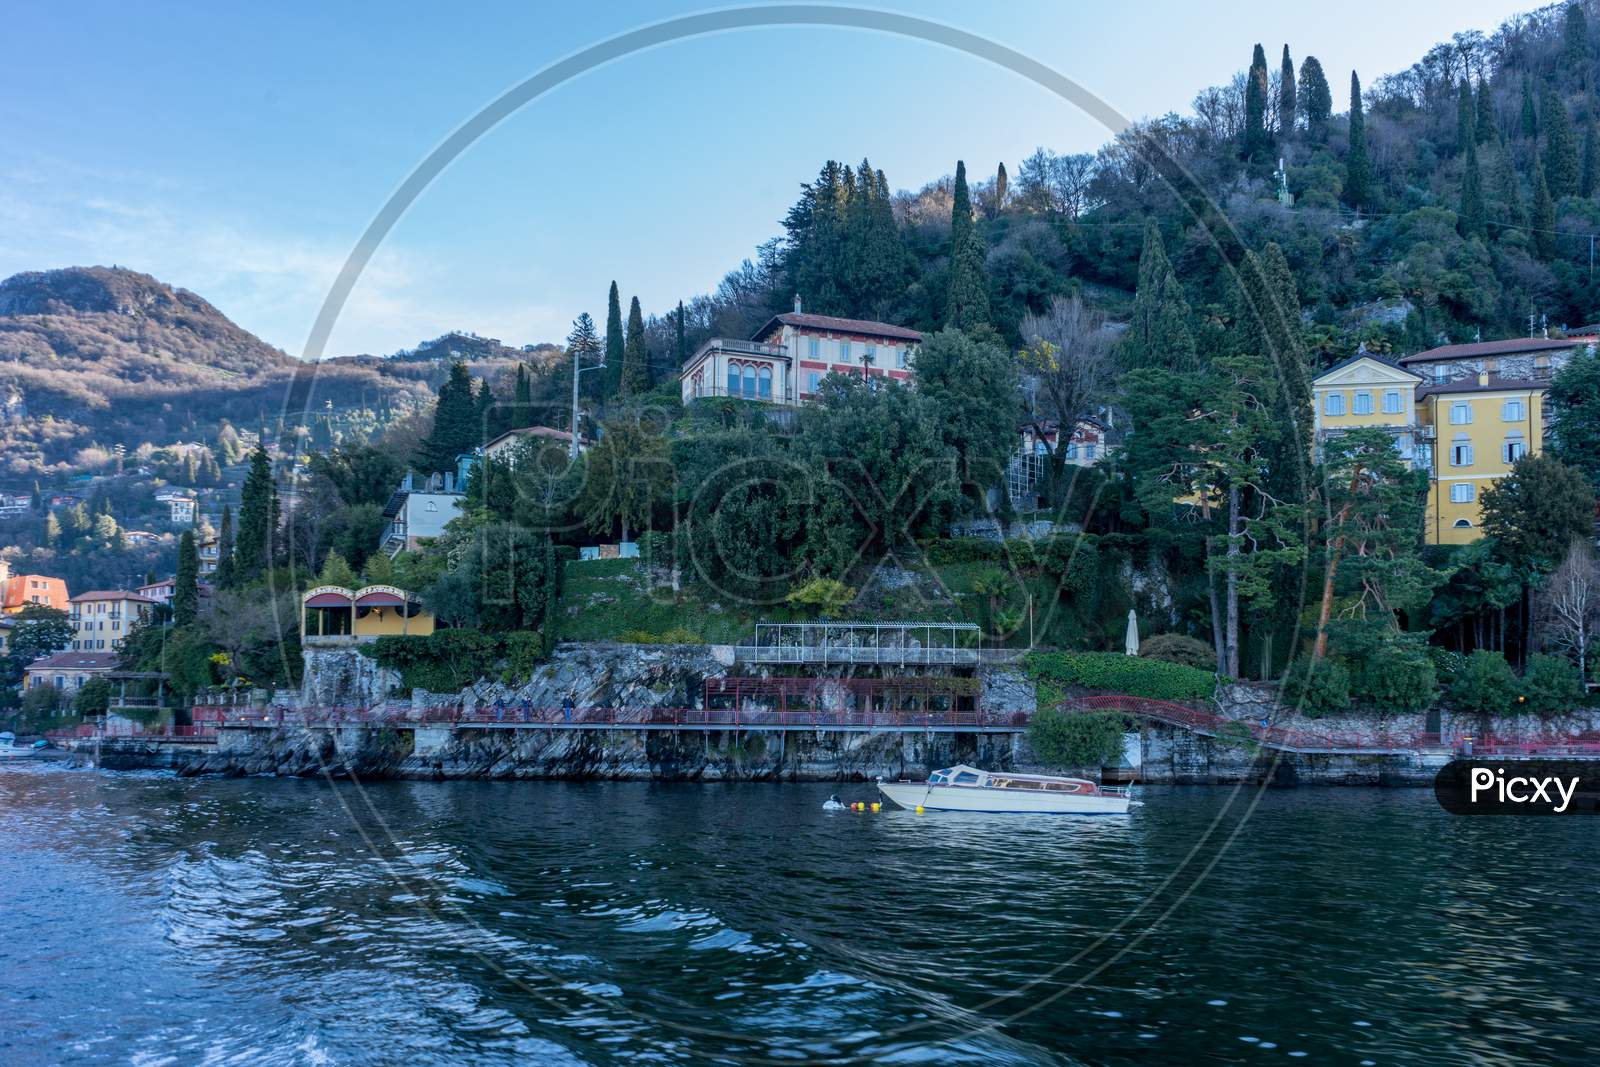 Italy, Bellagio, Lake Como, Lake Como, A Small Boat In A Body Of Water With Lake Como In The Background